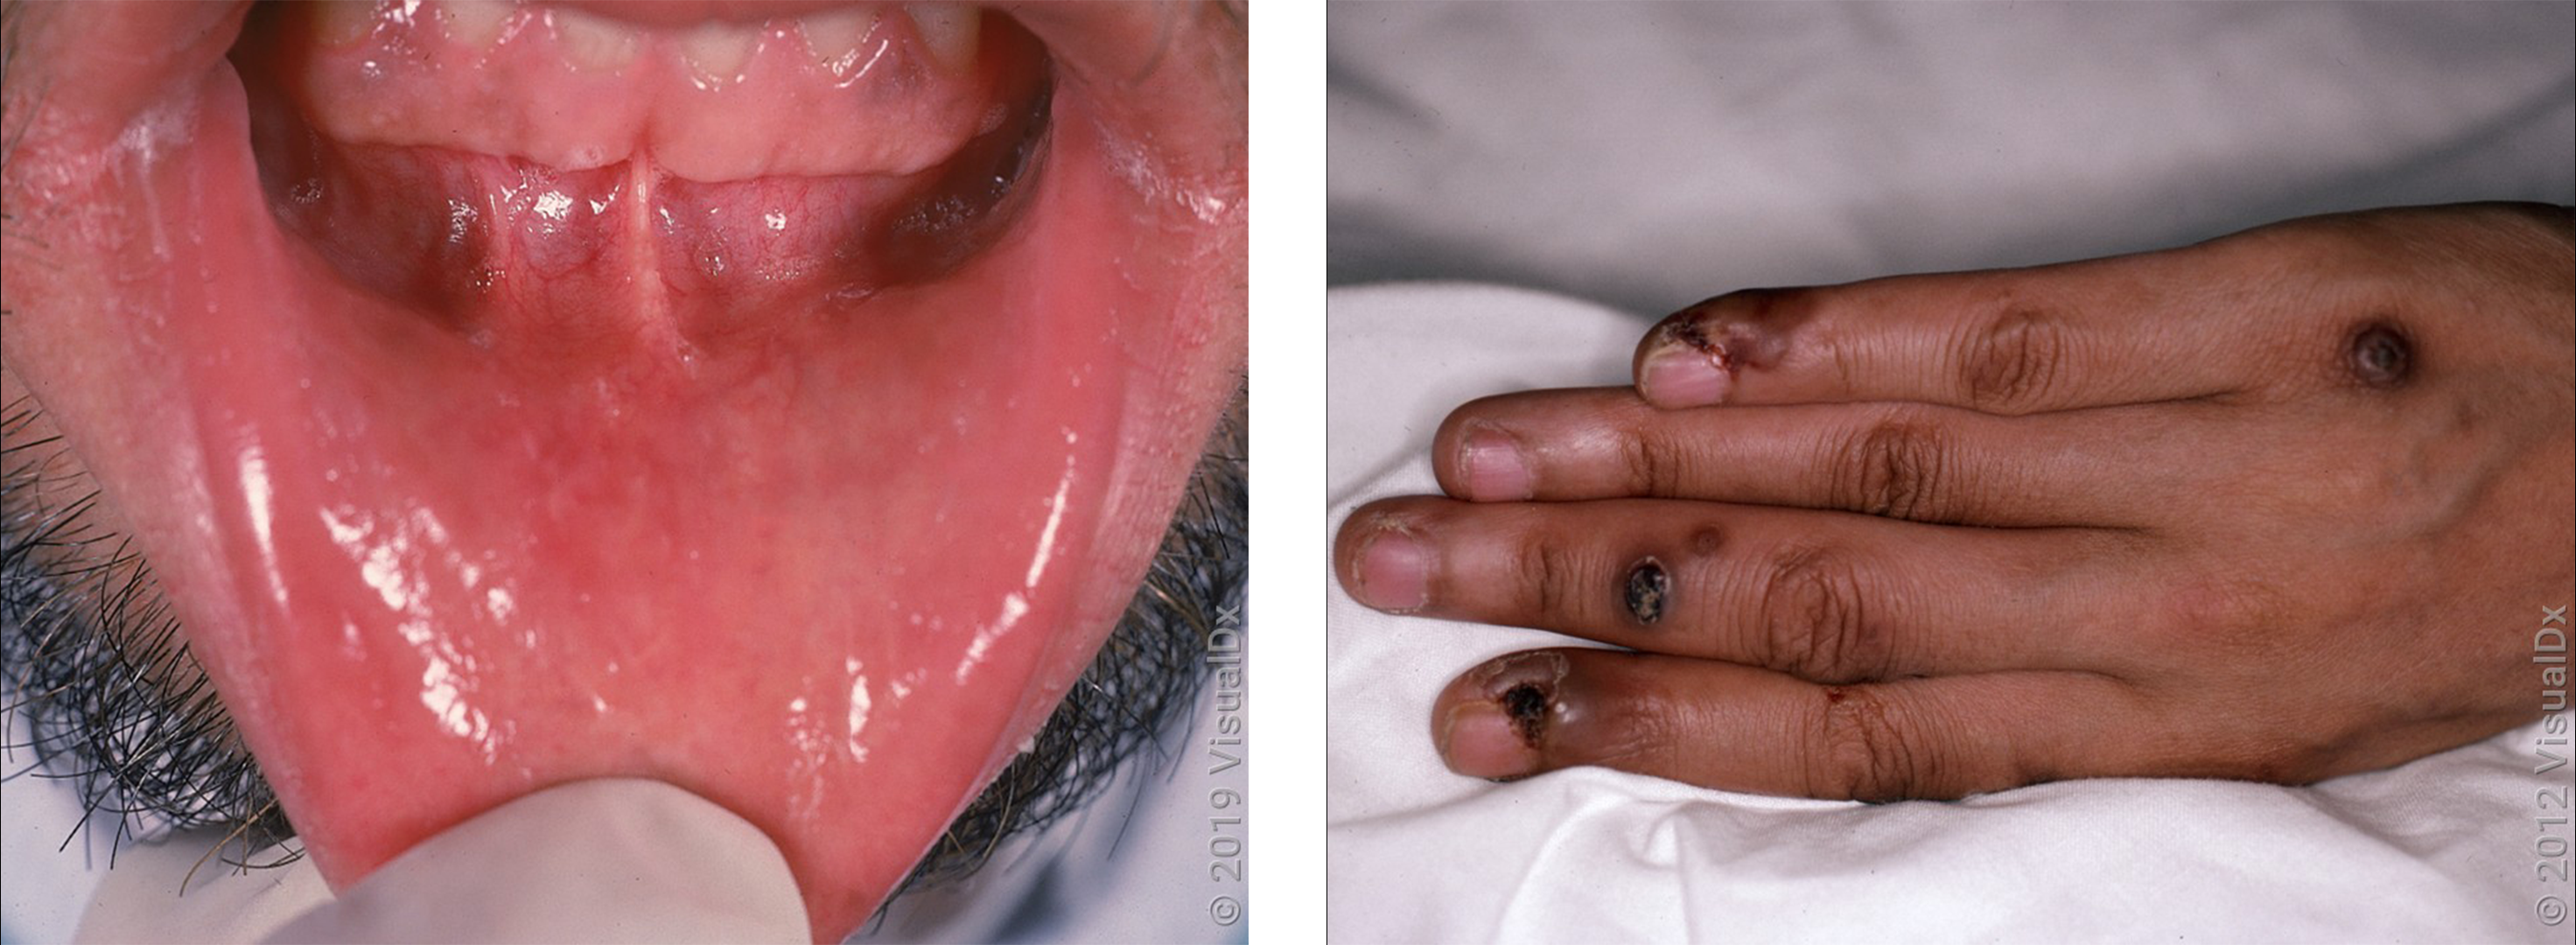 Left: Sores on the inner lower lip in Behçet disease. Right: Blisters and brown crusty patches on the hand in Behçet disease.